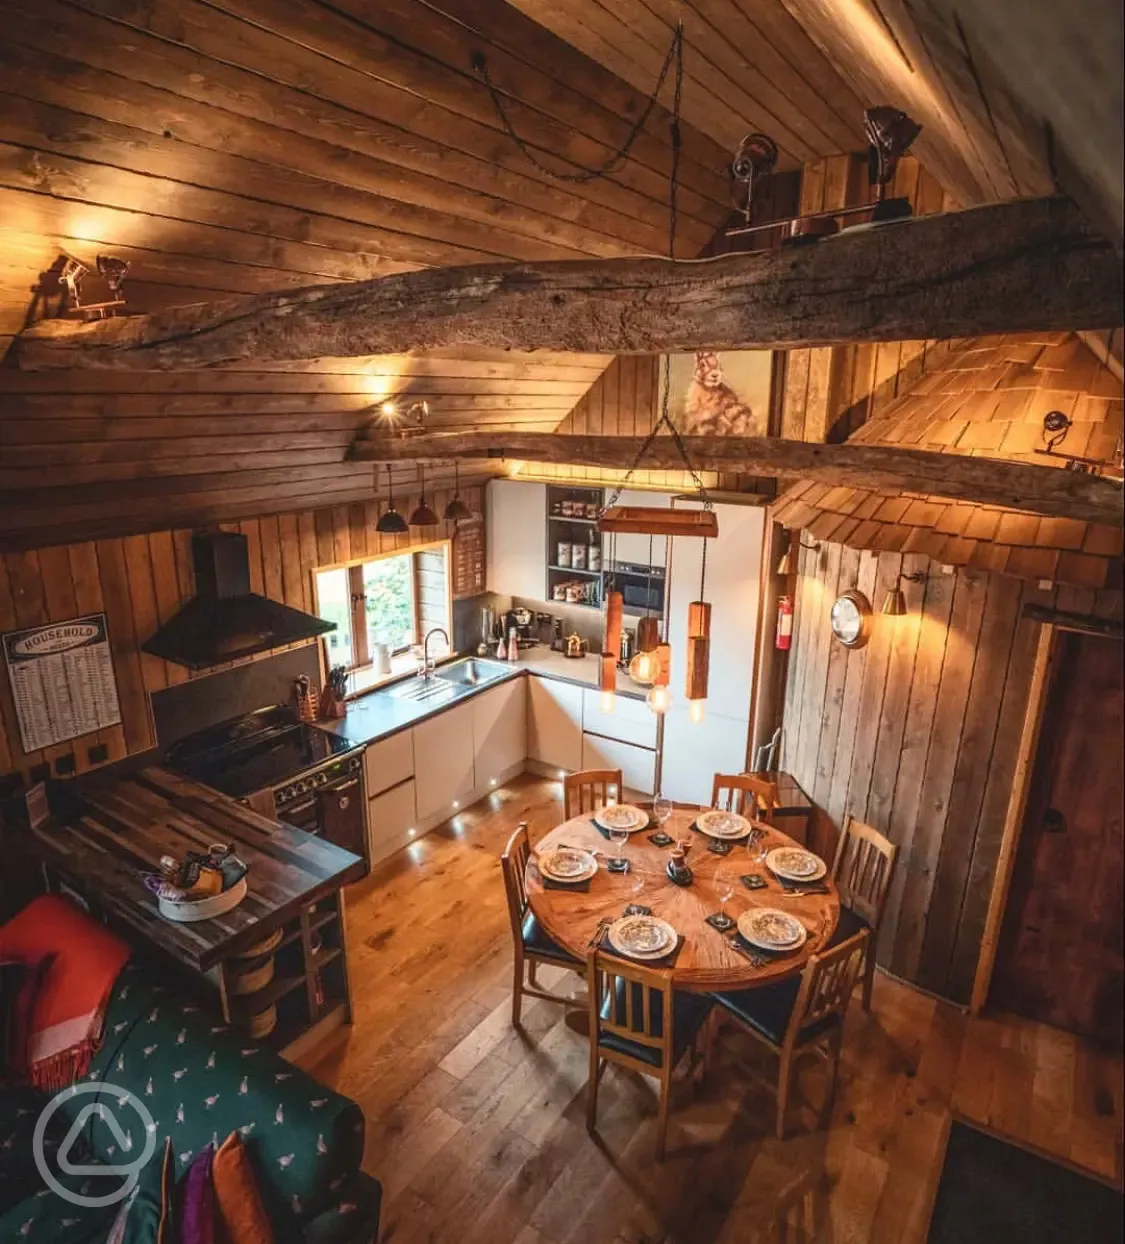 Rufus' roost treehouse interior